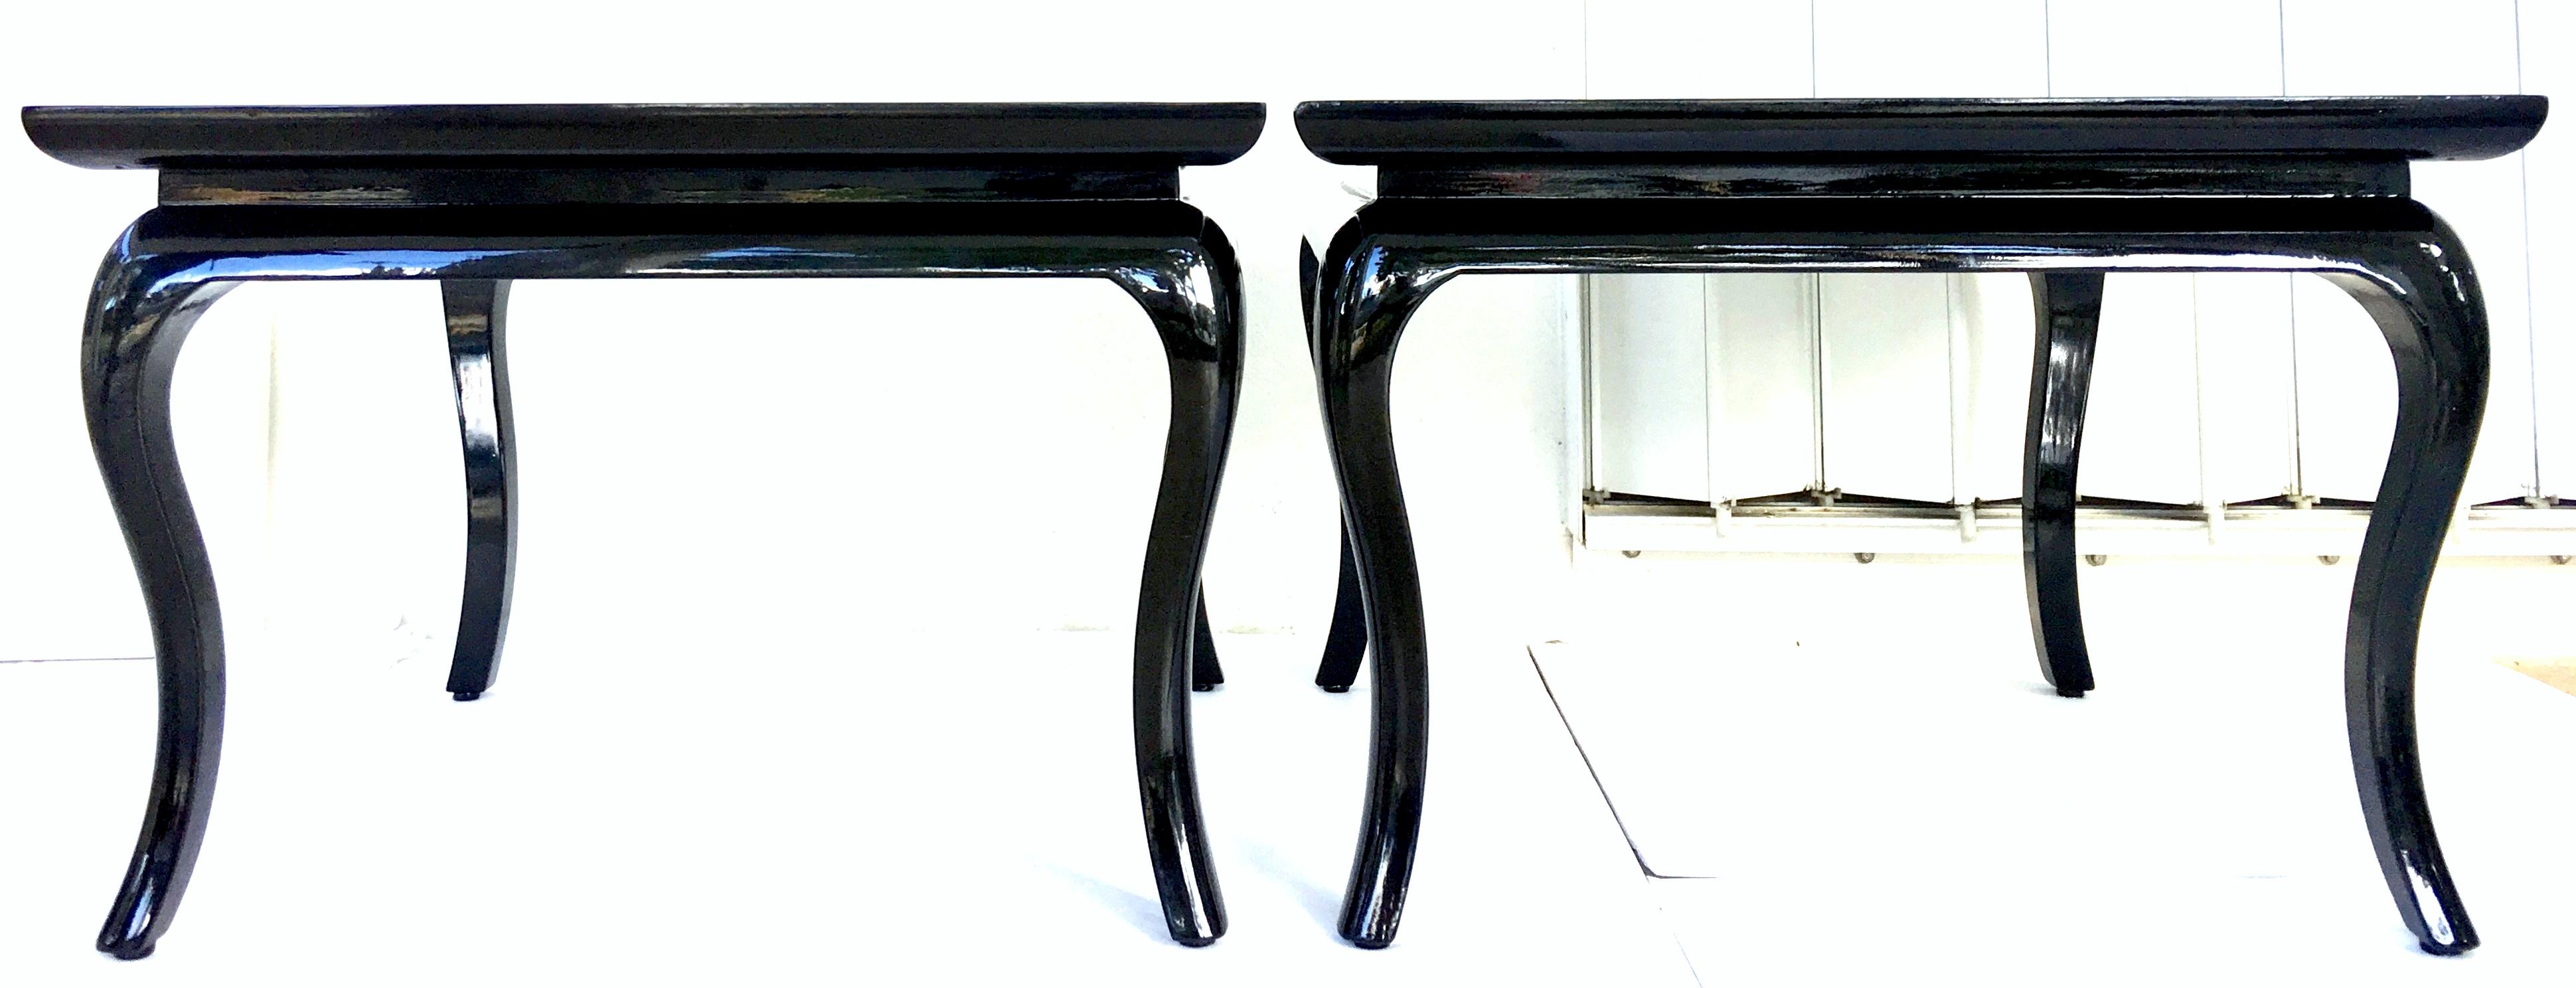 Mid-20th Century Pair of Lacquered and Marble-Top Hollywood Regency Side Tables In Good Condition For Sale In West Palm Beach, FL